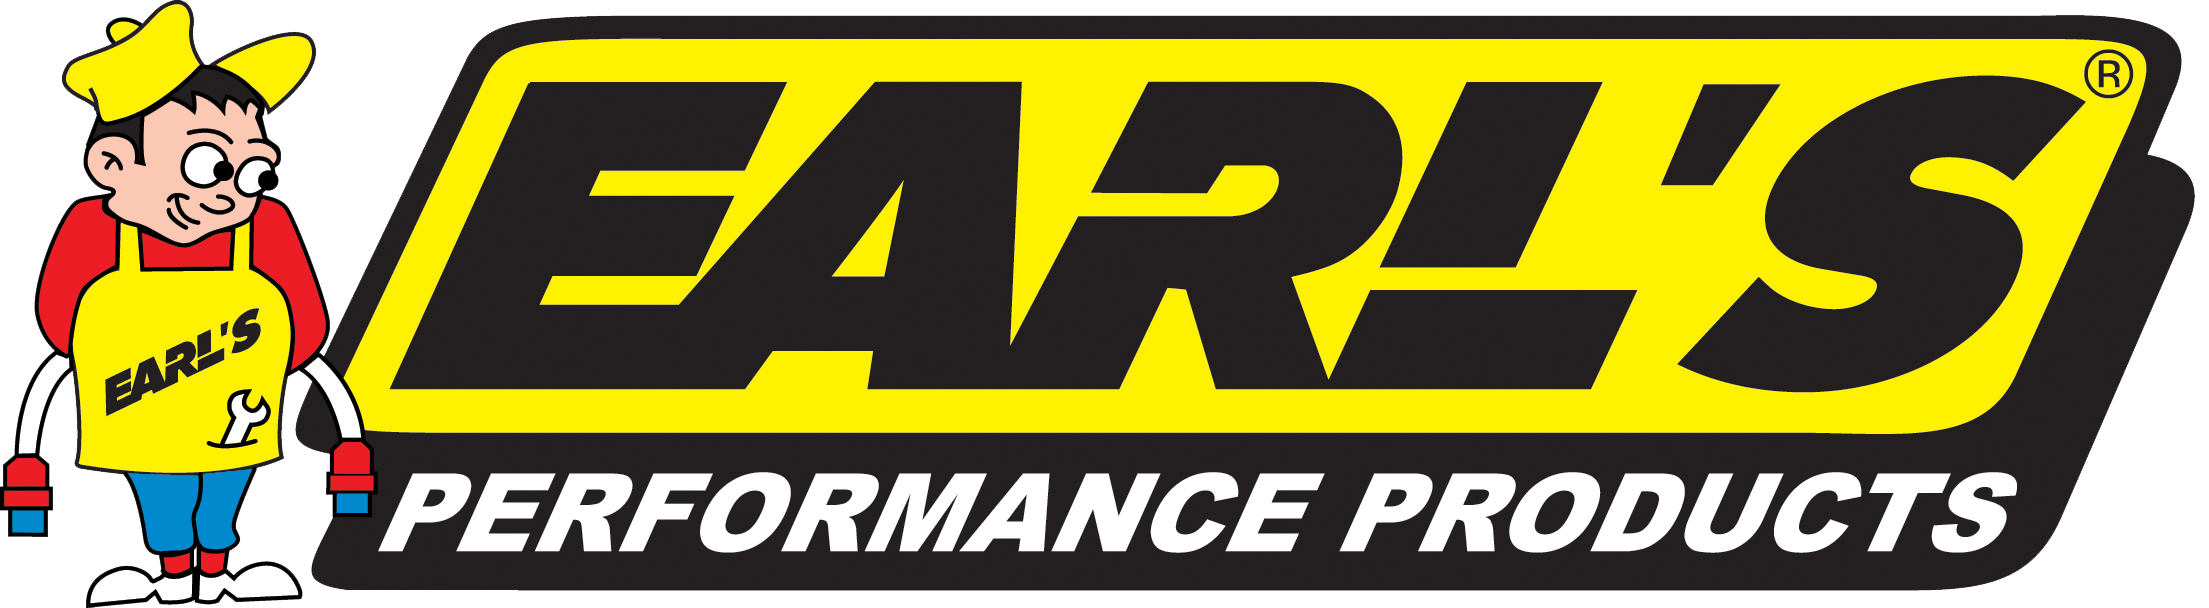 Earl Logo - Earls Performance Products UK Hose and Fittings